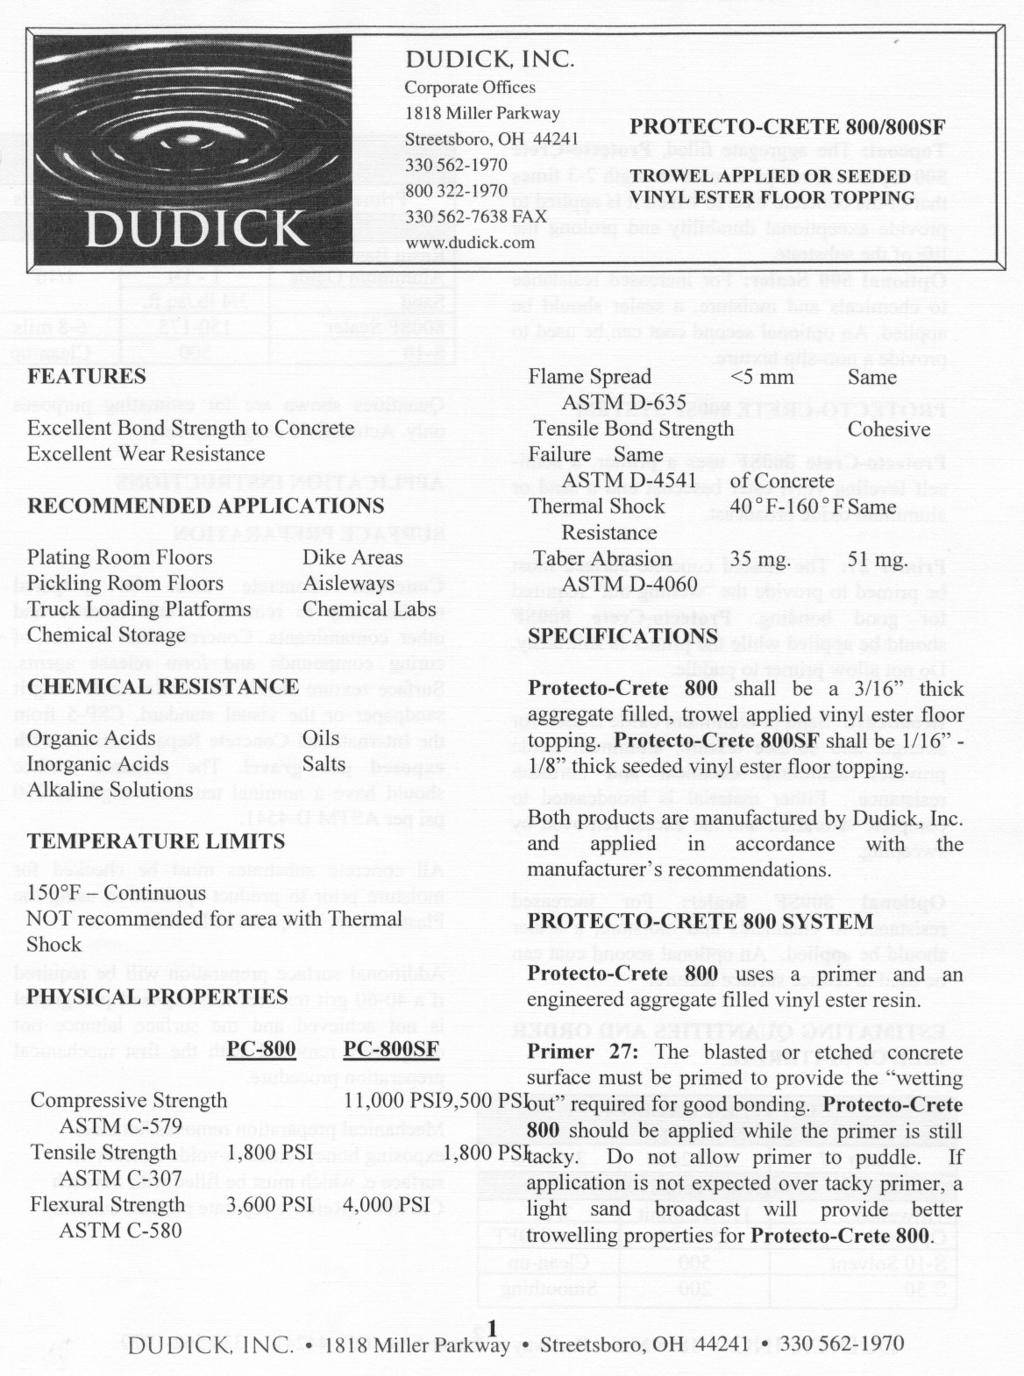 DUDICK, Corporate Offices INC. 1818 Miller Parkway Streetsboro, OH 44241 330562-1970 800322-1970 330 562-7638 FAX www.dudick.